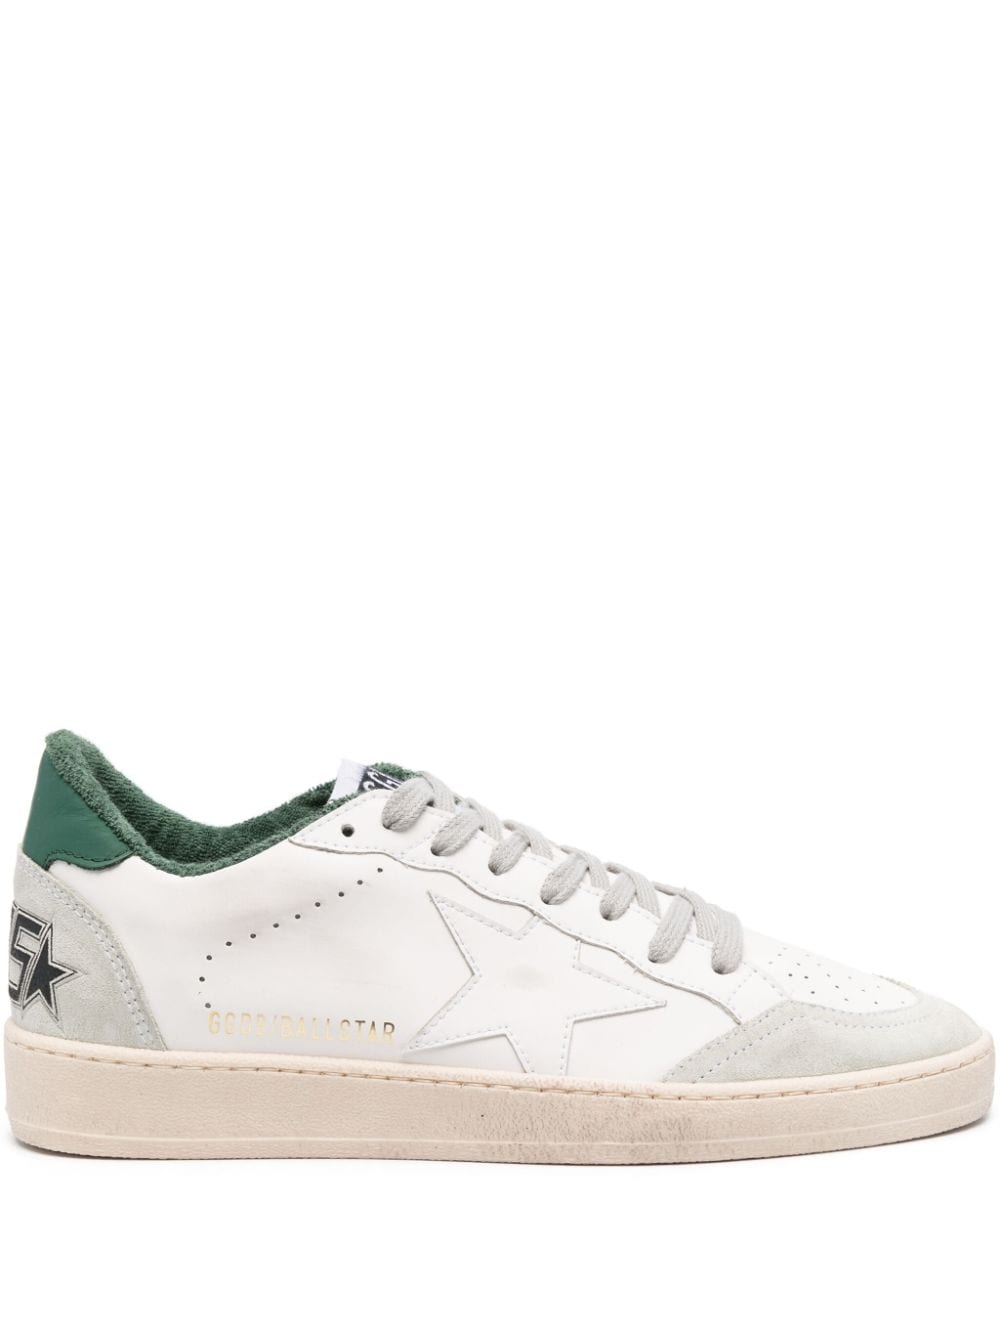 GOLDEN GOOSE Men's White Suede and Leather Low-Top Sneakers